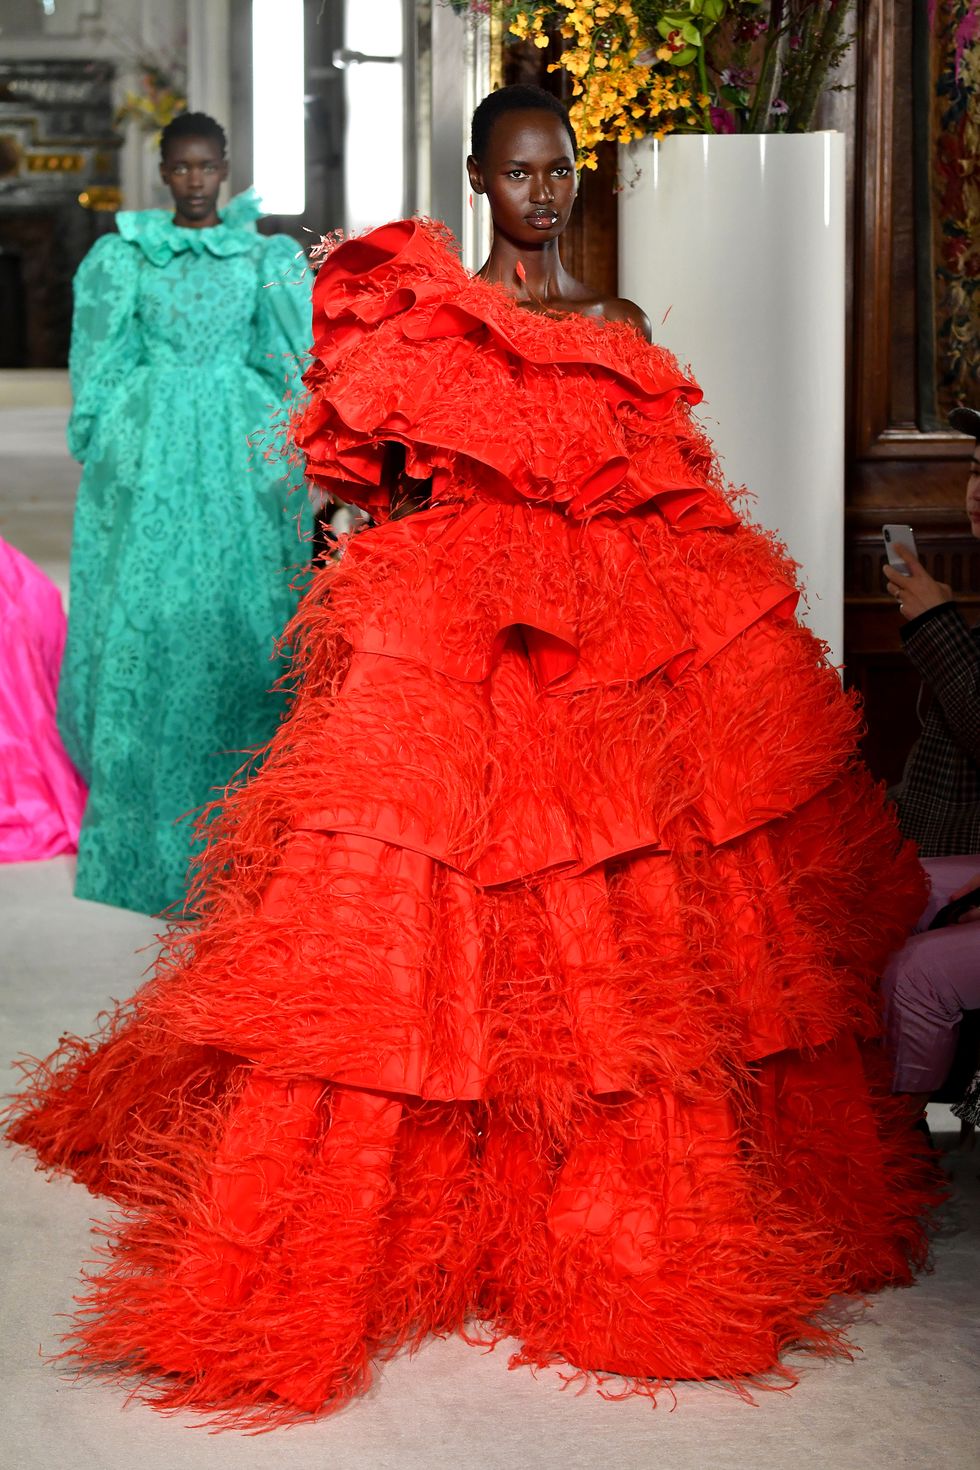 The Most Popular Dress At Spring 2019 Haute Couture